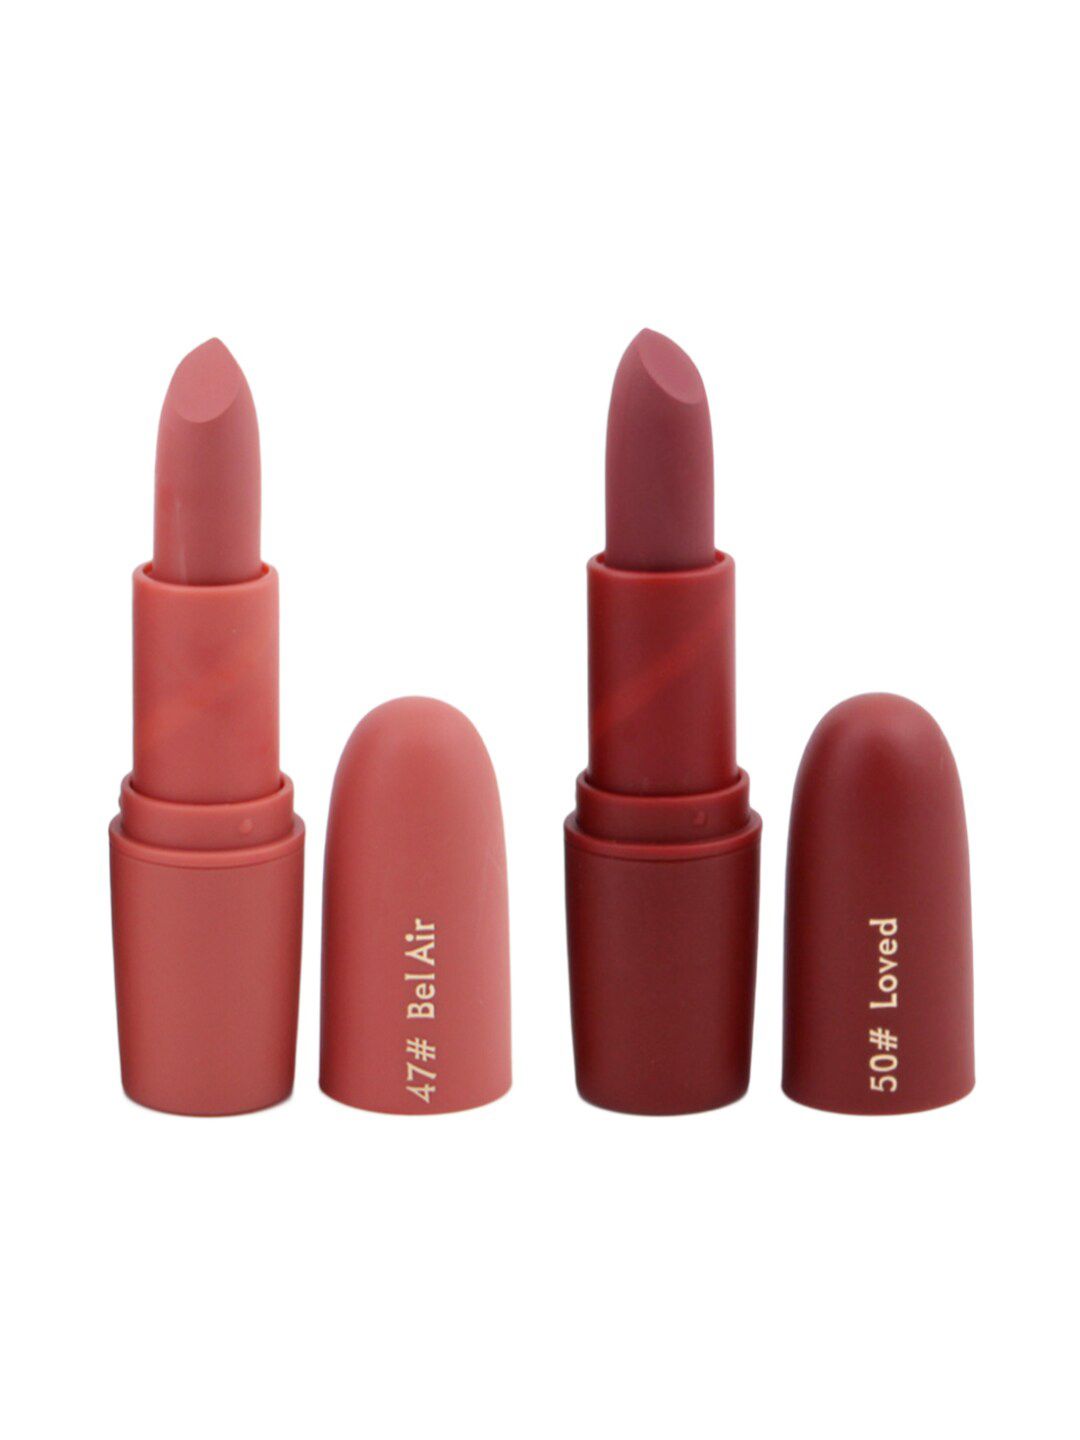 MISS ROSE Professional Make-Up Set of 2 Matte Creamy Lipsticks - Bel Air 47 & Loved 50 Price in India